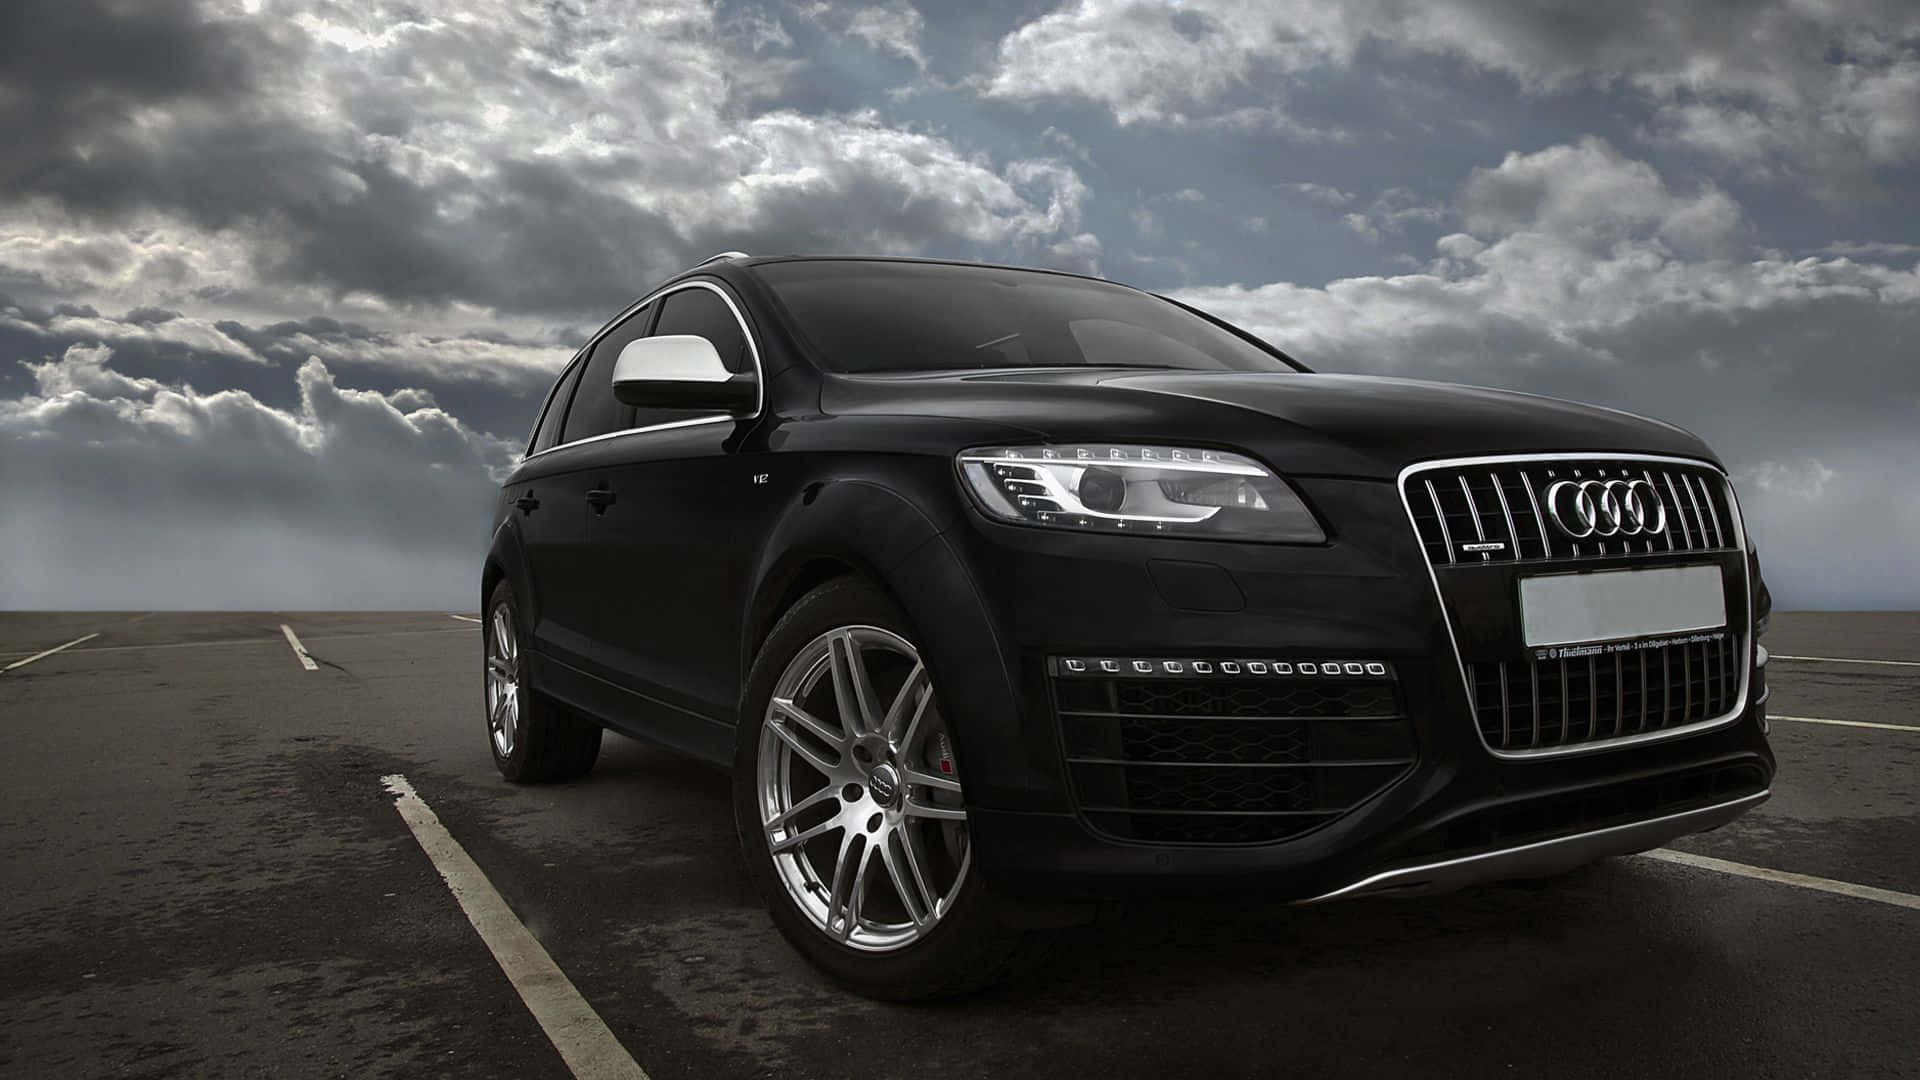 Breathtaking view of a sleek Audi Q7 on a scenic mountain road. Wallpaper